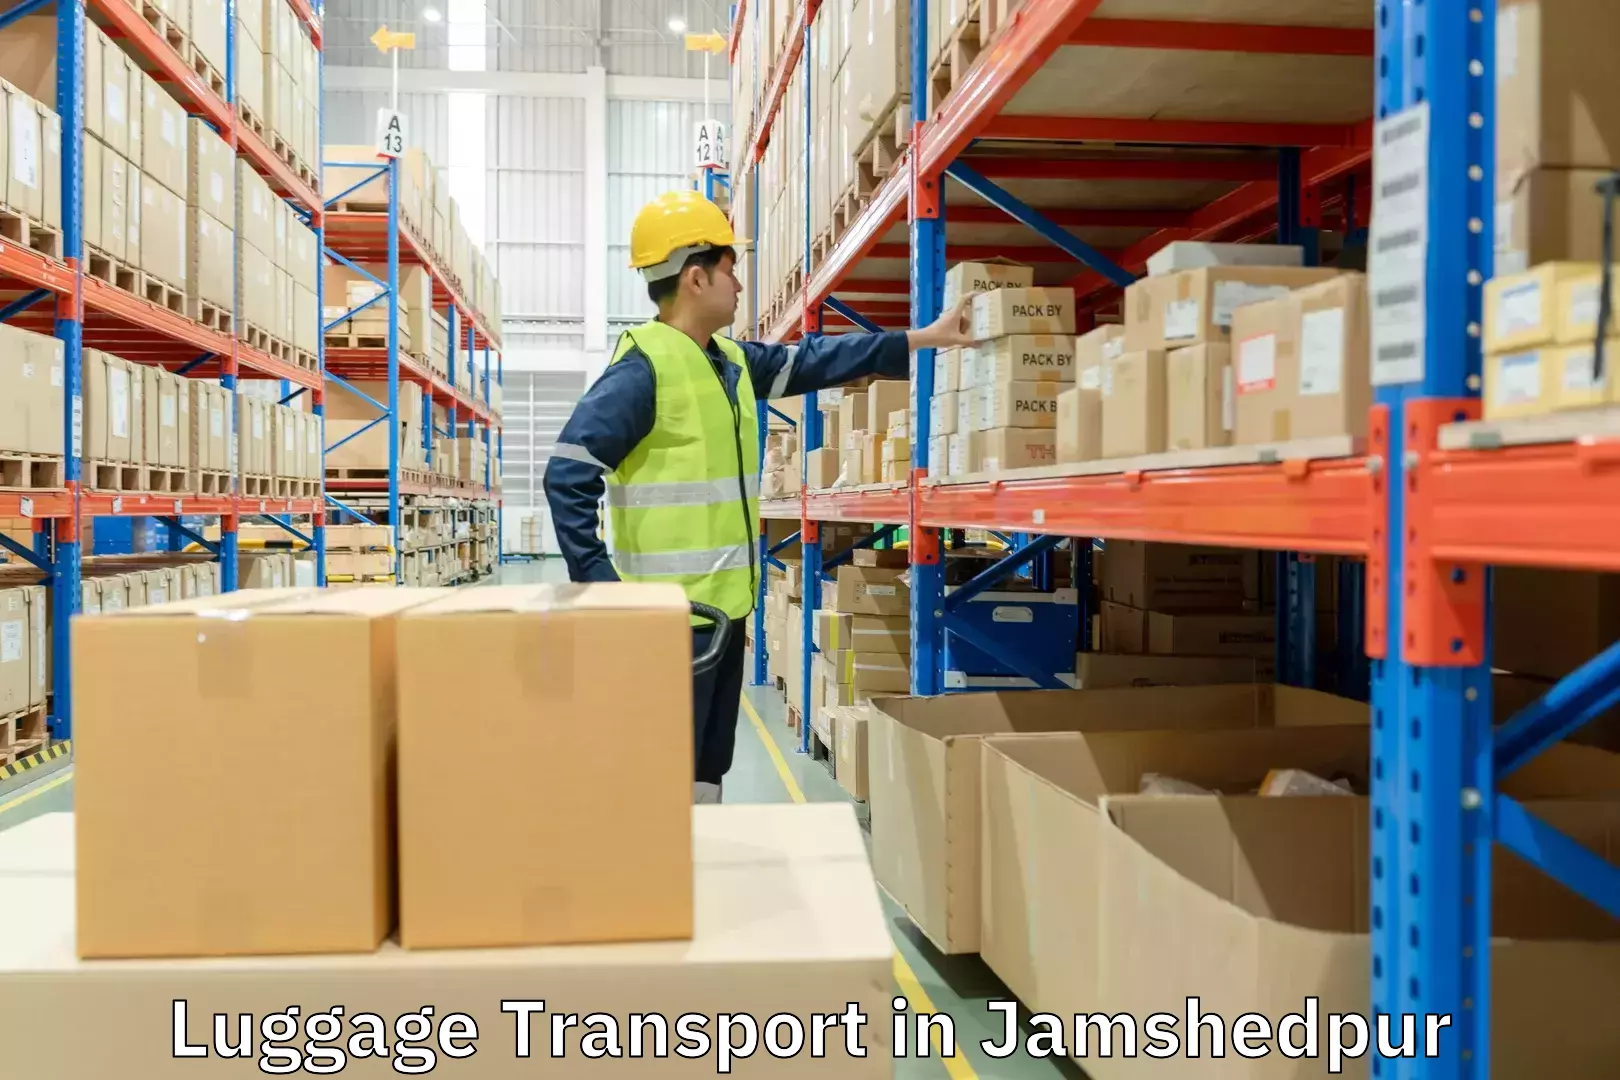 Holiday season luggage delivery in Jamshedpur